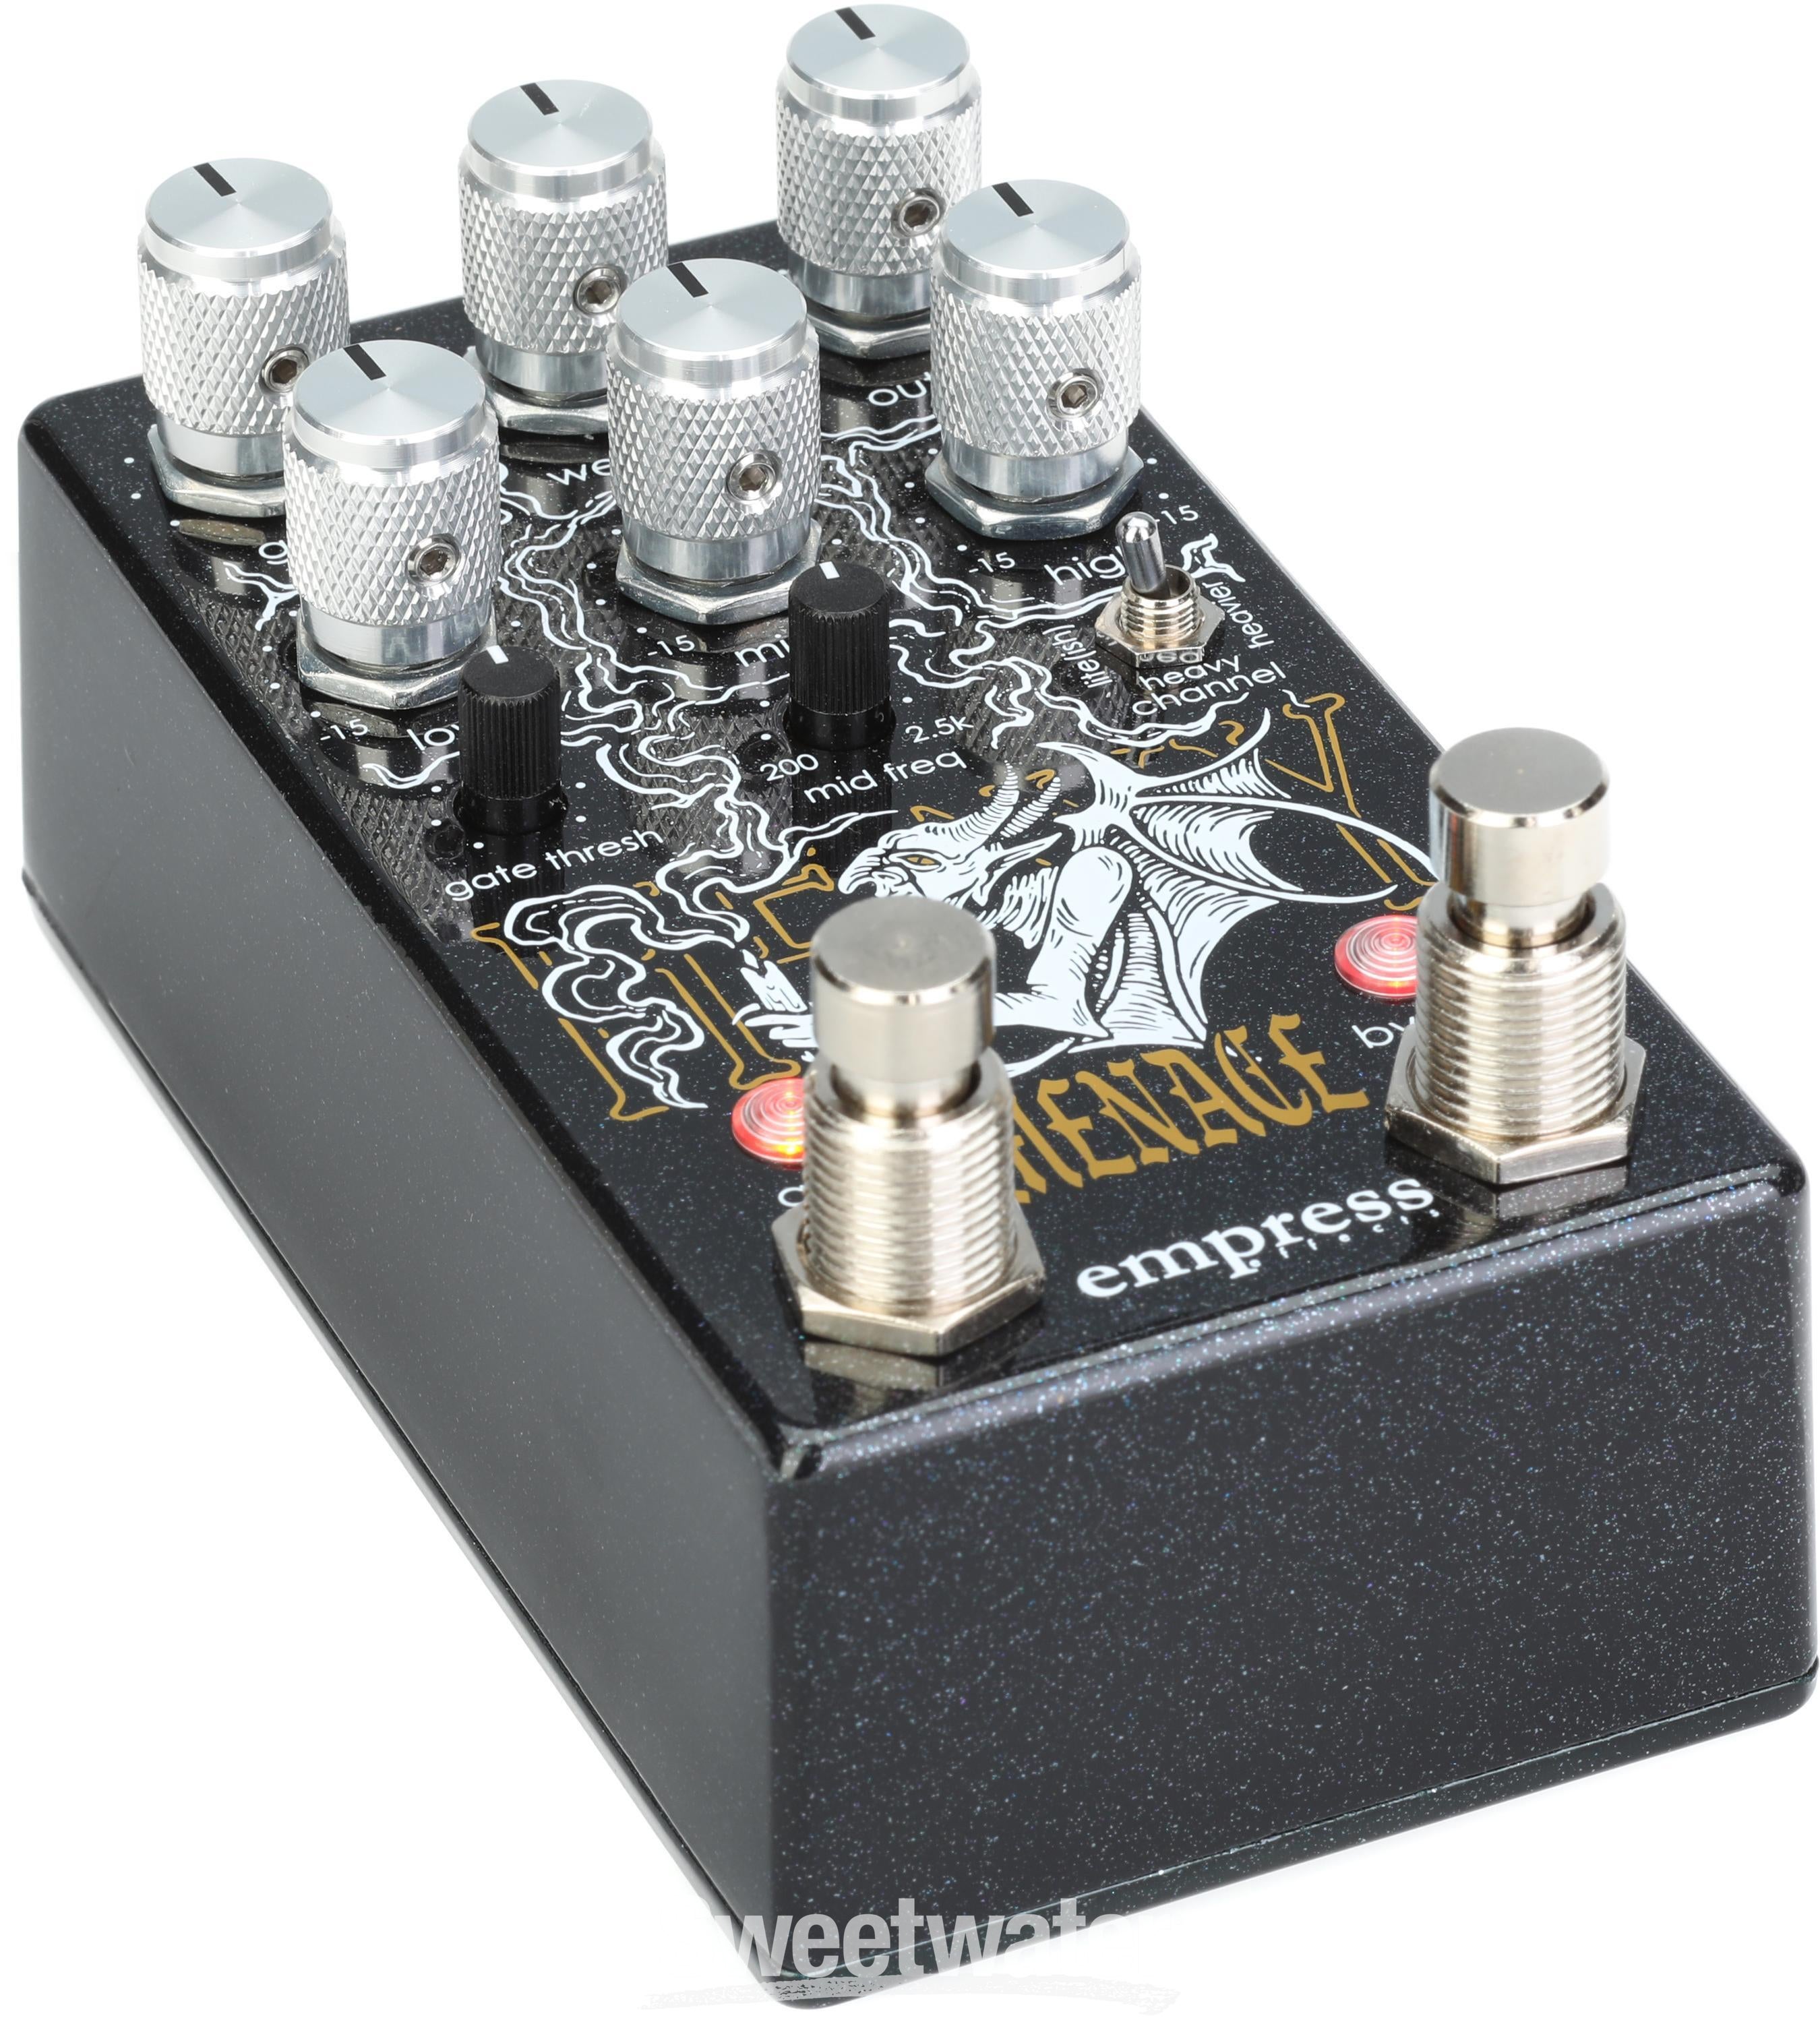 Empress Effects Heavy Menace Distortion Pedal | Sweetwater